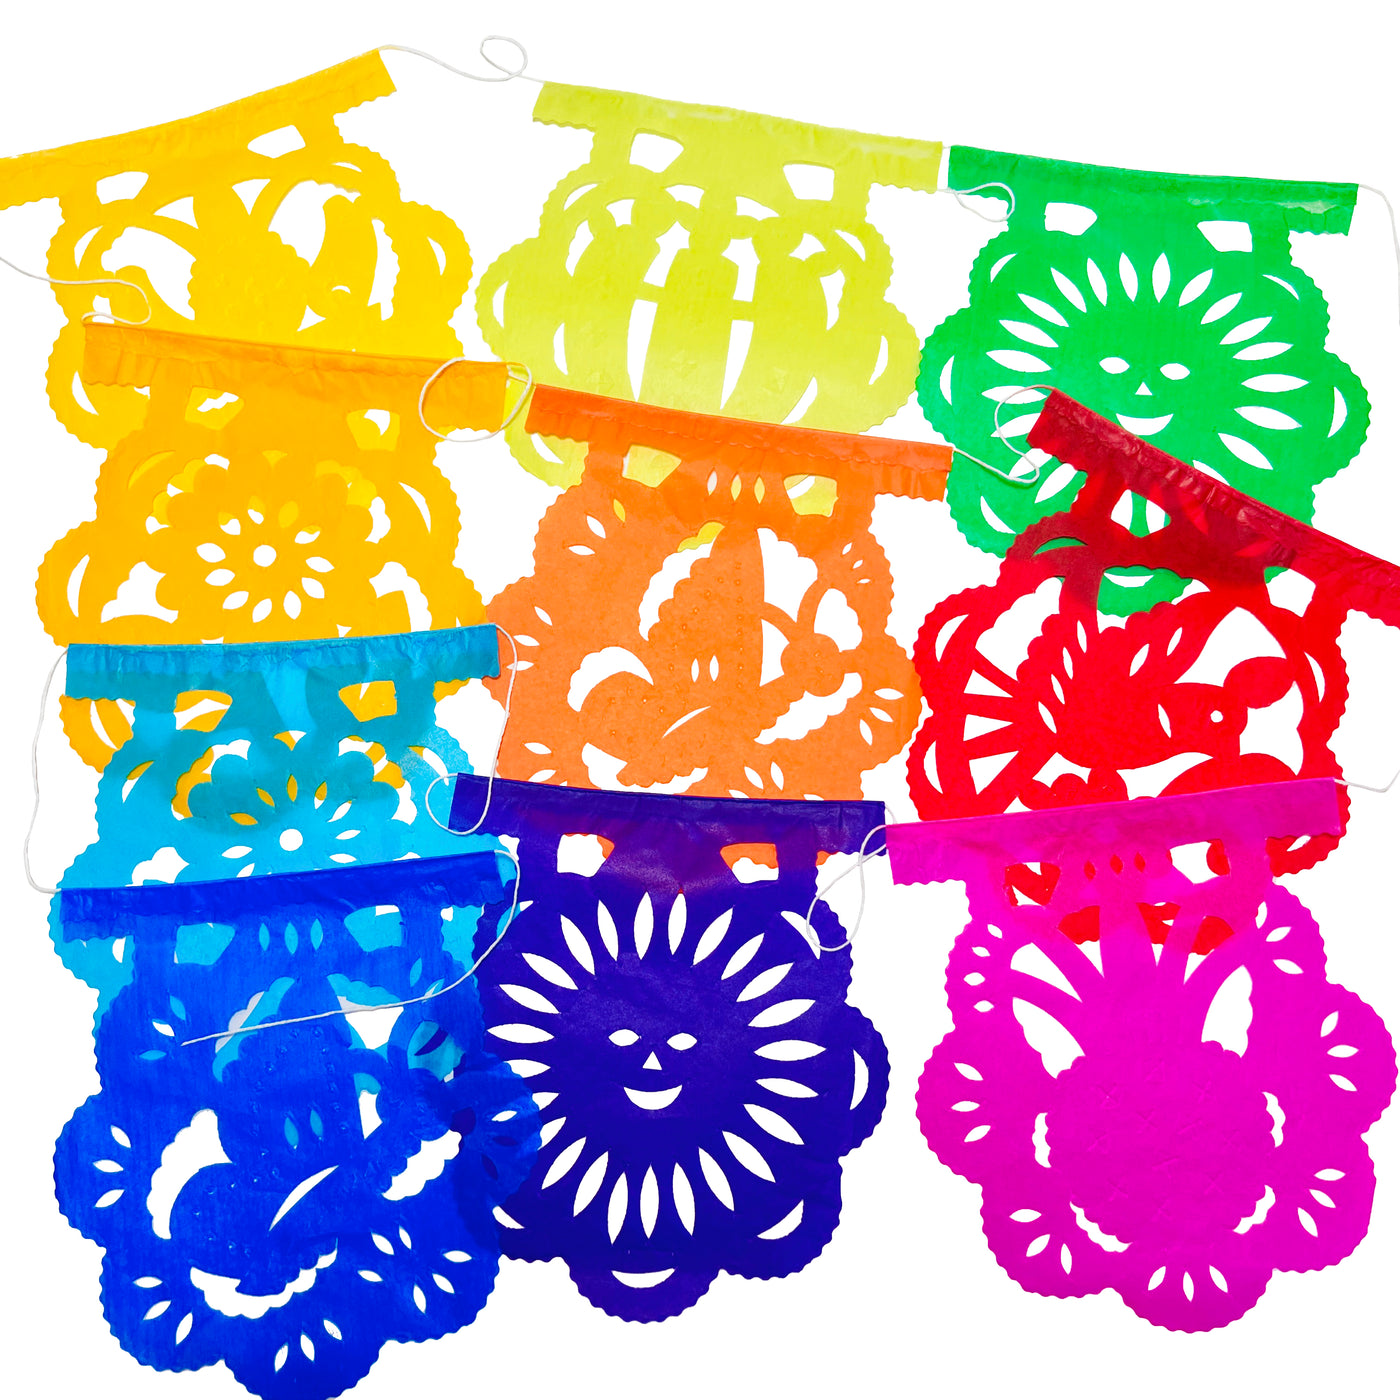 multicolor round papel picado tissue paper flags attached to a white string with various designs including but not limited to flowers, suns, cactus, birds, pineapples, & butterflies